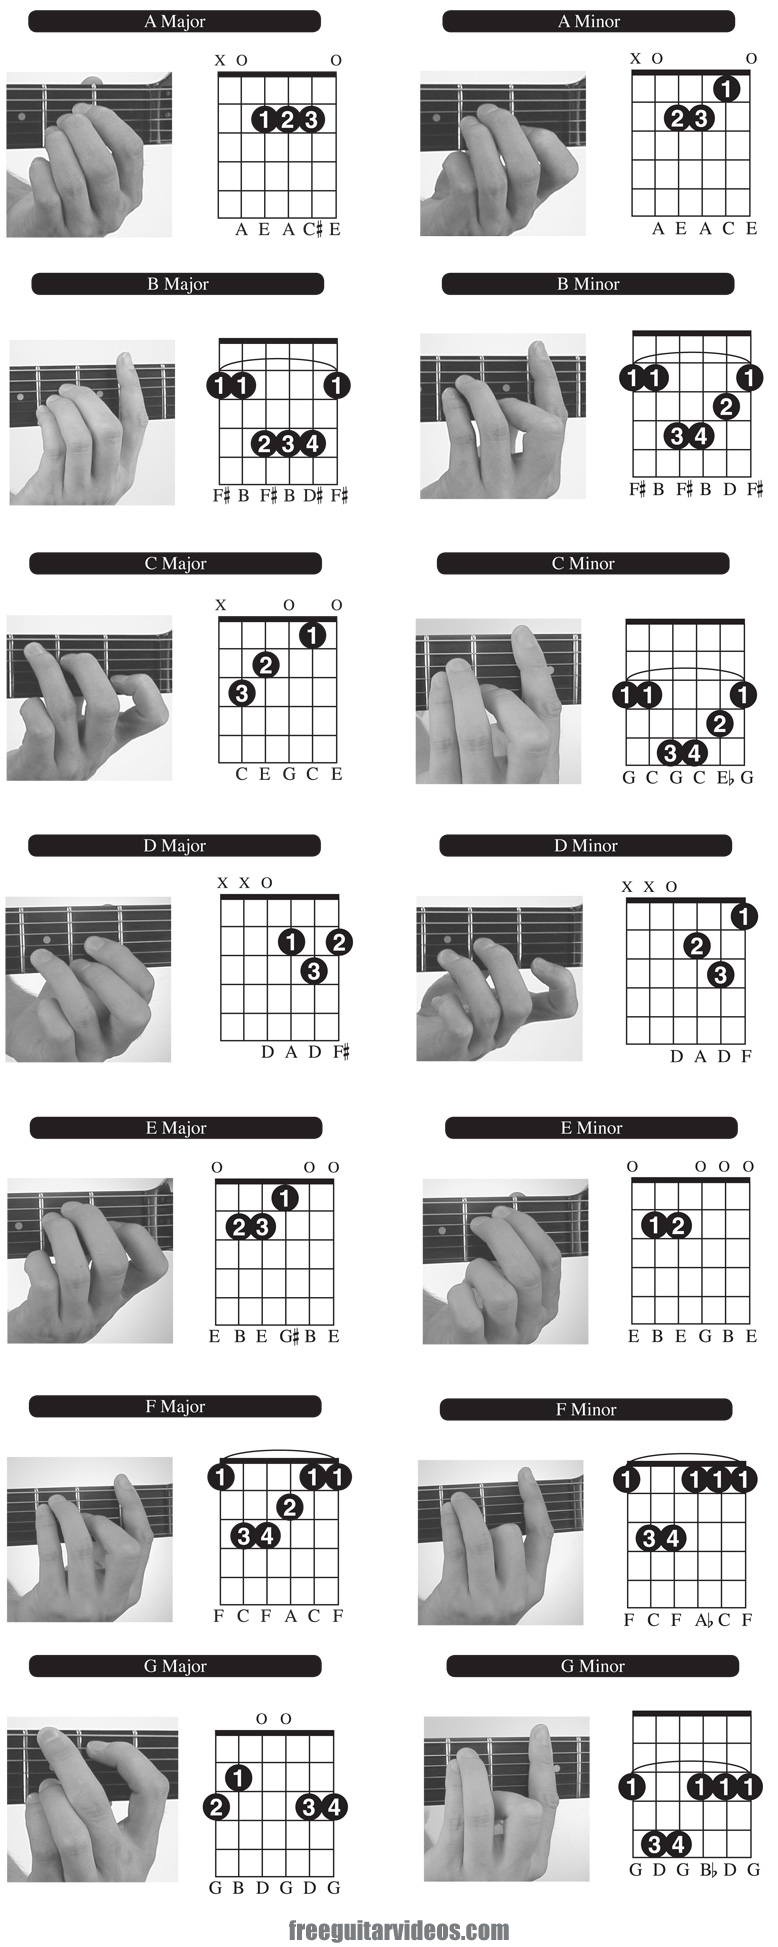 guitar-chords-chart-for-beginners-2015confession